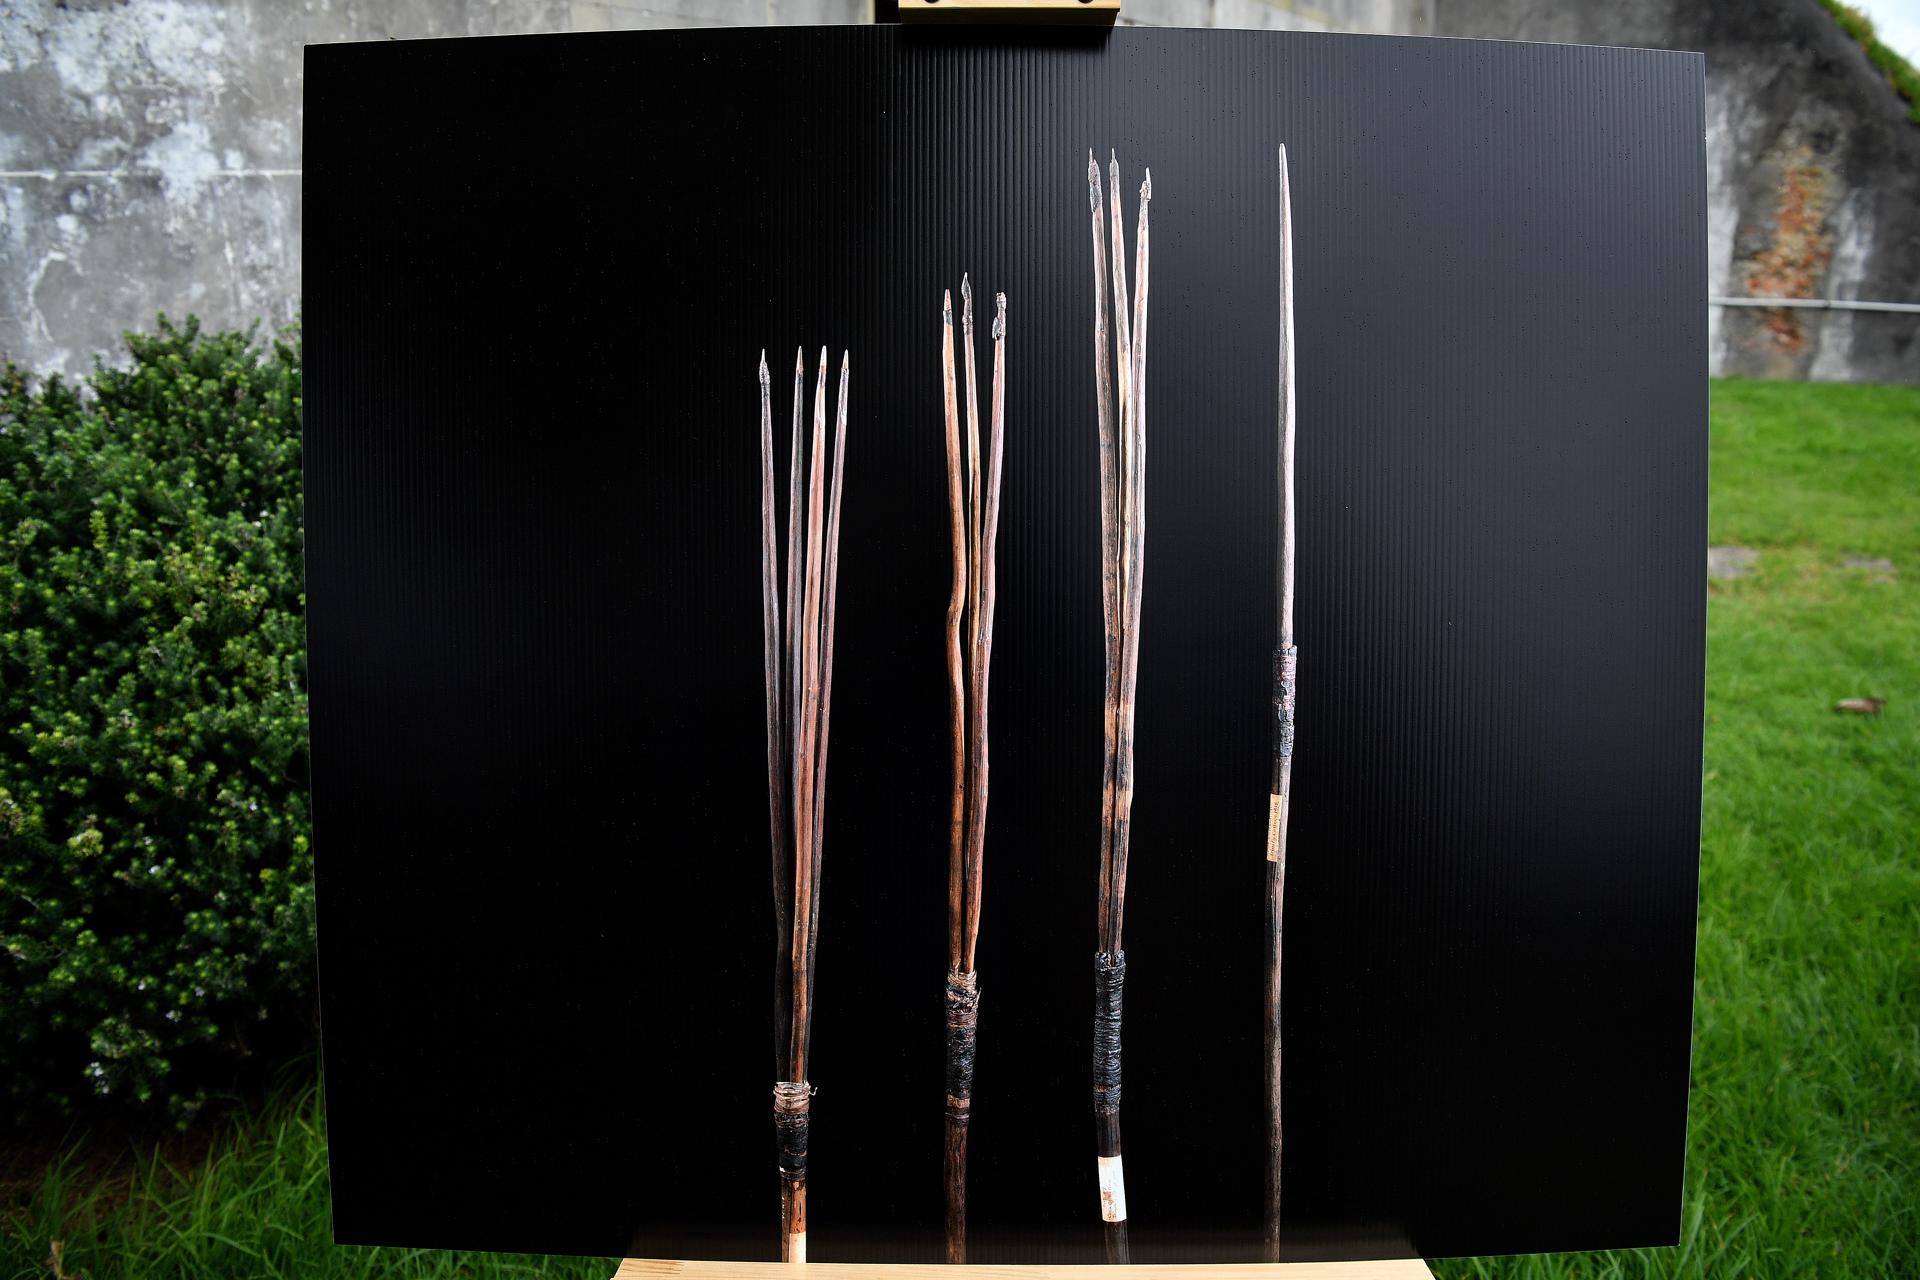 A photograph of the four historic Australian Aboriginal Kamay spears that will be repatriated back to Country is seen during a press conference on Bare Island, in Sydney, Australia, 02 March 2023. EFE-EPA/BIANCA DE MARCHI AUSTRALIA AND NEW ZEALAND OUT